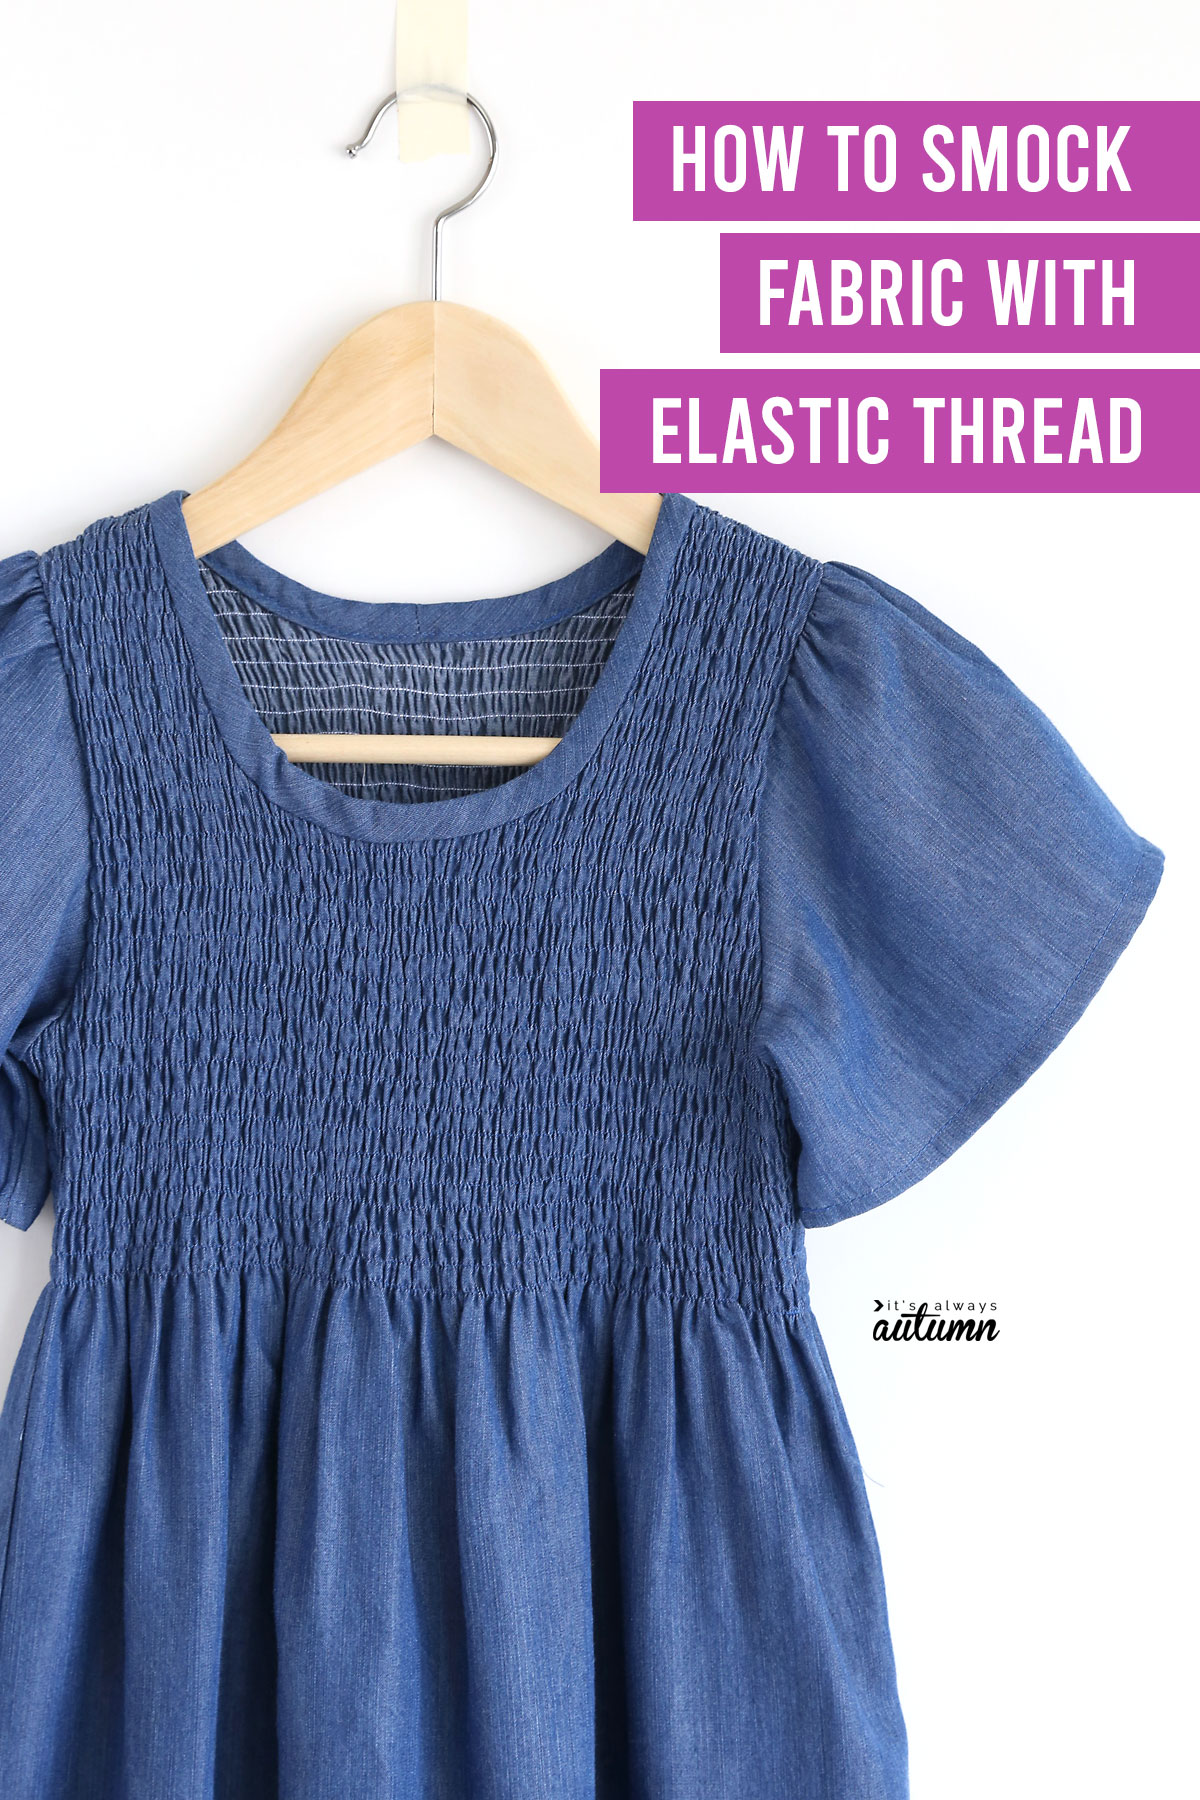 Sewing with Elastic Thread {Shirring Fabric} Made Easy